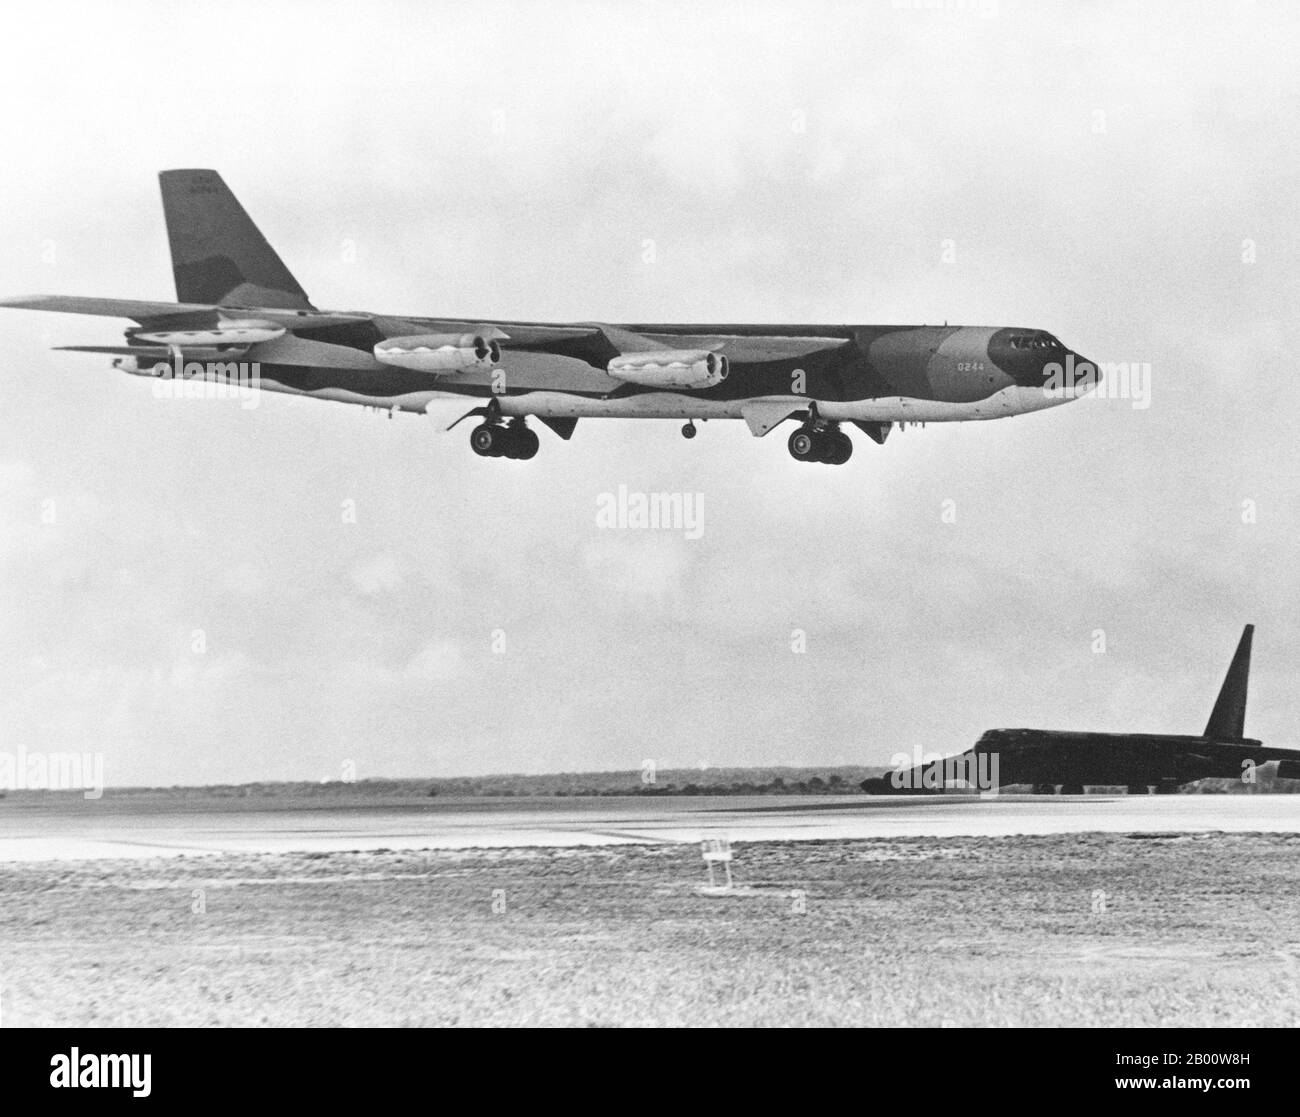 Guam:  A USAF B-52D Stratofortress is overshadowed by a USAF B-52G returning from a bombing mission over Hanoi, 1972.  A B-52D Stratofortress aircraft waits beside the runway as a B-52G approaches for landing after completing a bombing mission over North Vietnam during Operation Linebacker. The aircraft are from the Strategic Air Command.  The Second Indochina War, known in America as the Vietnam War, was a Cold War era military conflict that occurred in Vietnam, Laos, and Cambodia from 1 November 1955 to the fall of Saigon on 30 April 1975. Stock Photo